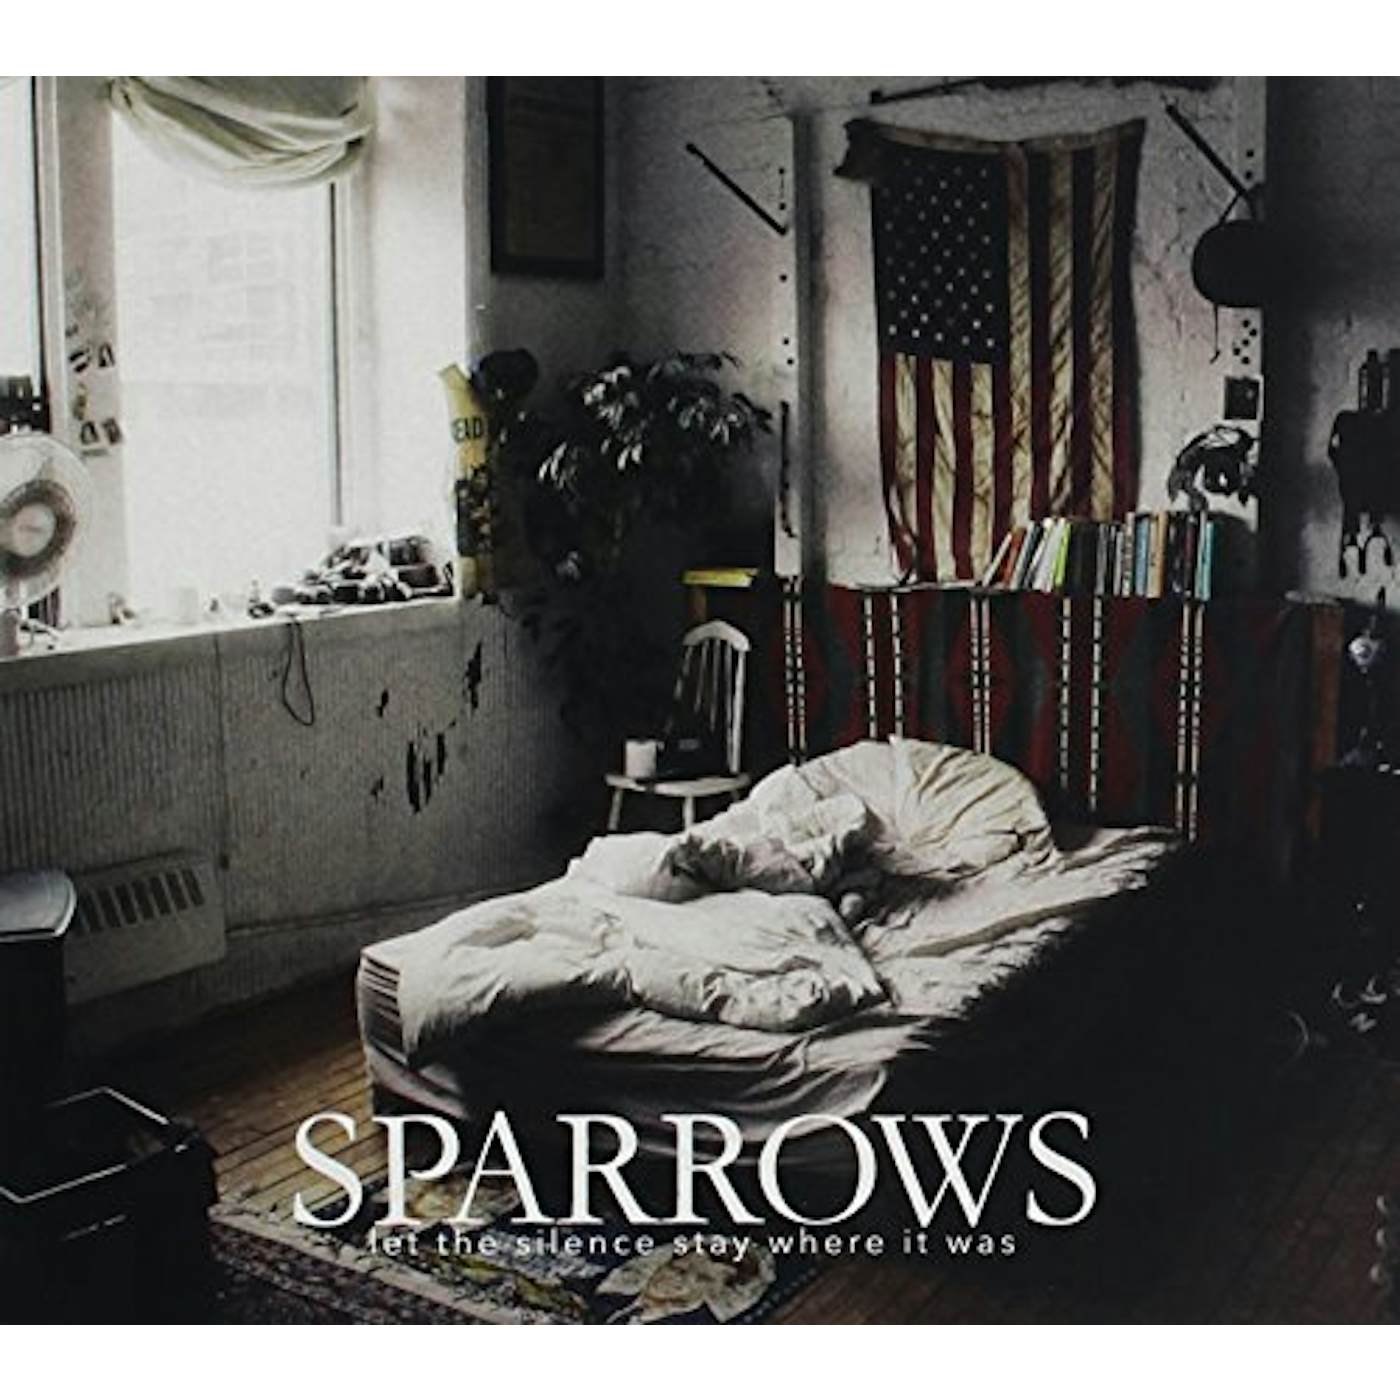 Sparrows LET THE SILENCE STAY WHERE IT WAS CD